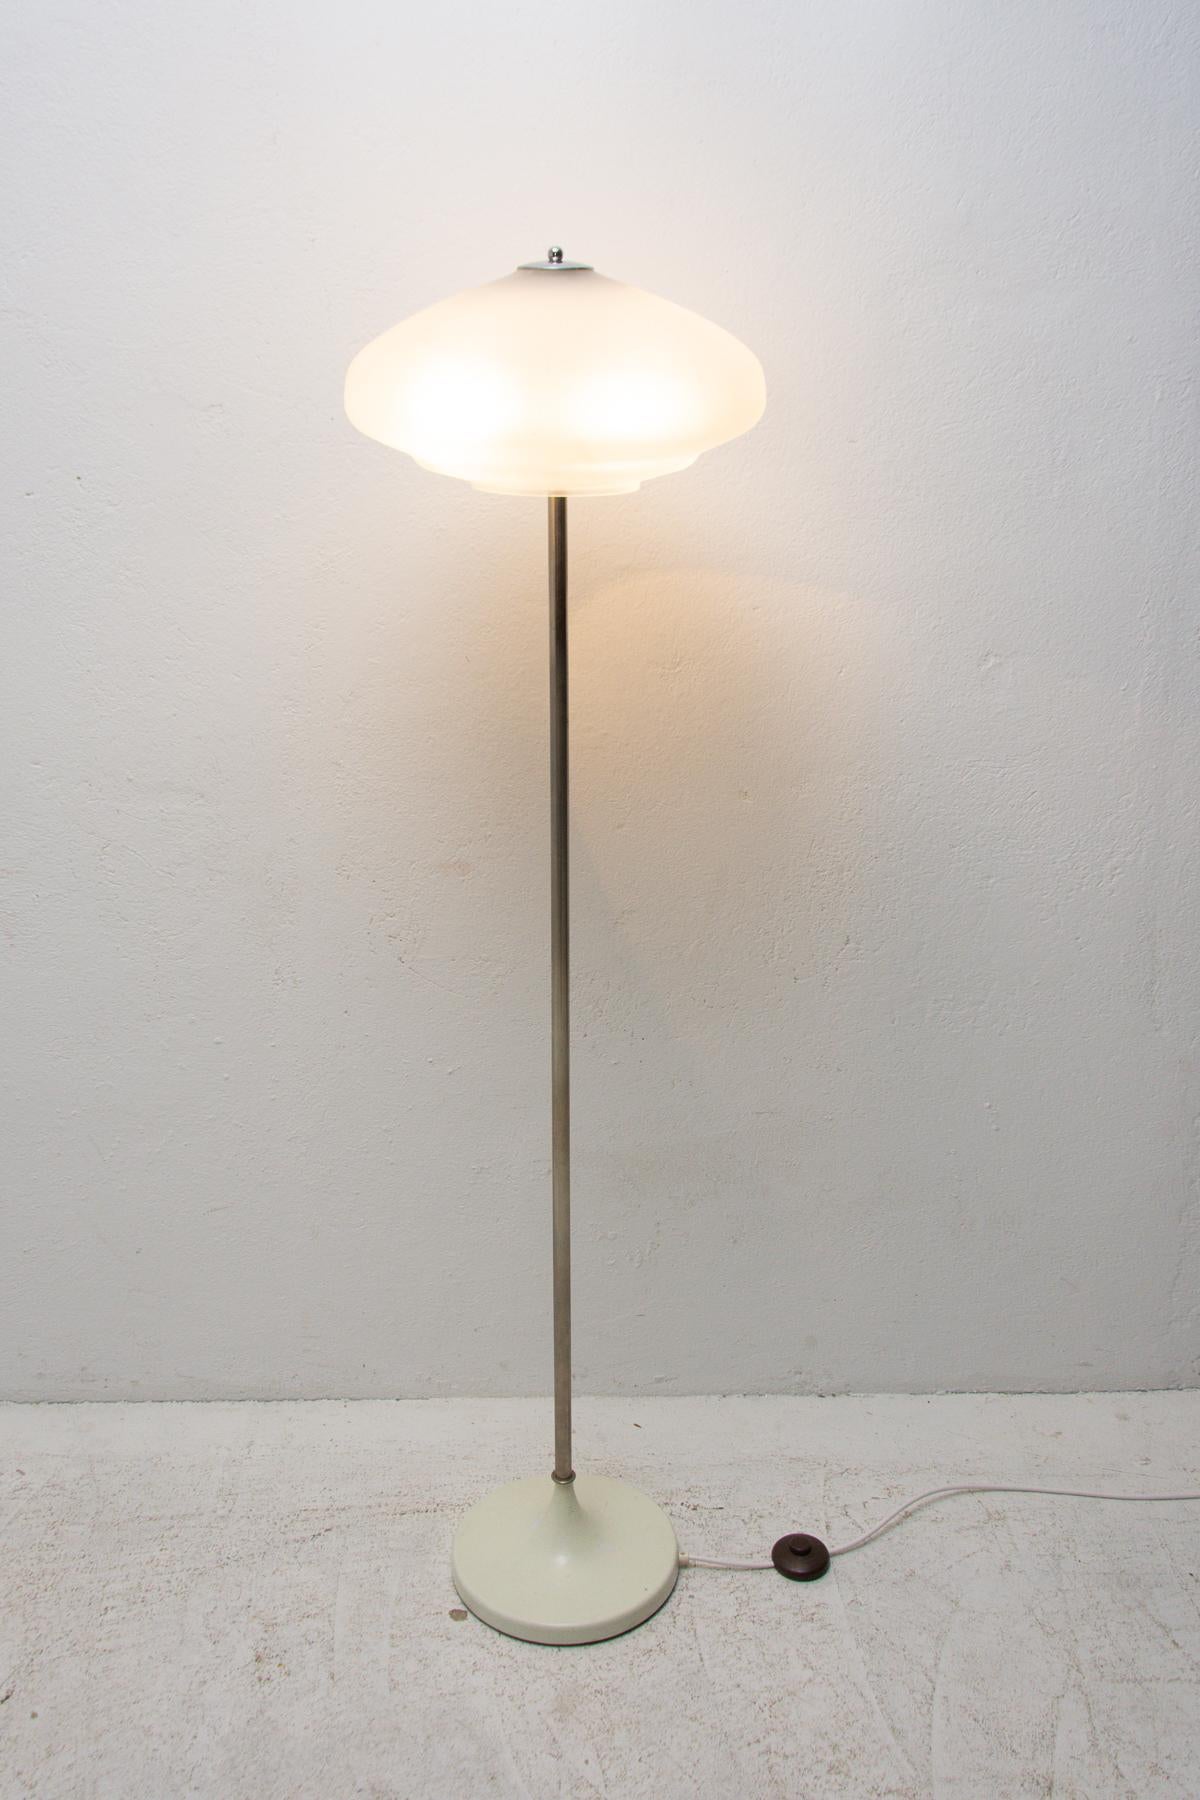 Upcycled metal floor lamp, corresponds to the design of the so-called “Brussels period” and the world-famous EXPO58.
This simple lamp has a slim stand, the shade is made of glass, the base is painted in white. Two E27 bulbs, new wiring.
In very